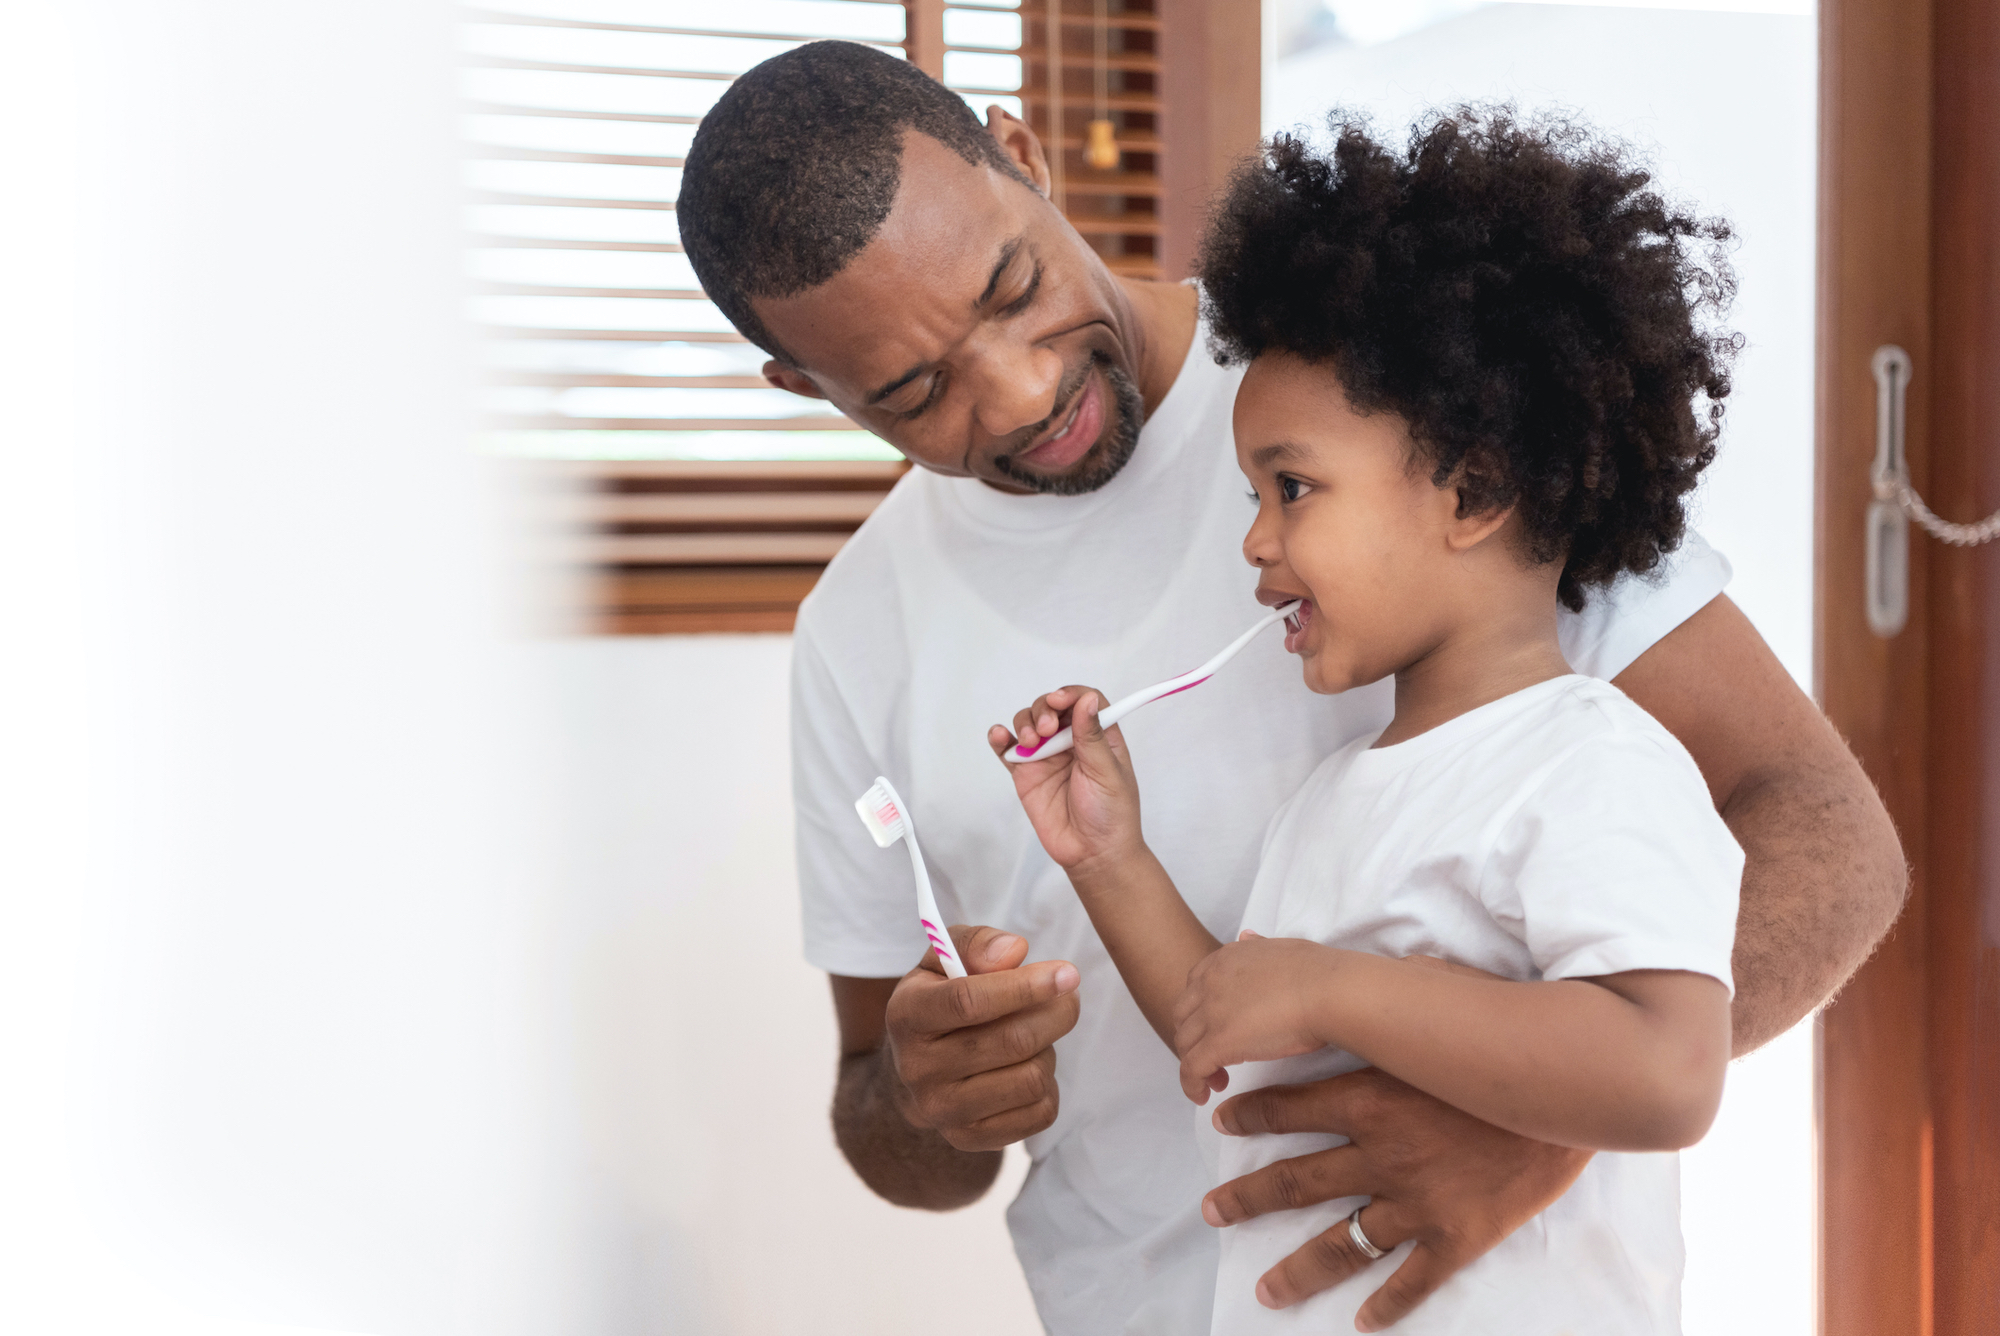 Adult holding a toothbrush standing with arm around toddler brushing teeth.